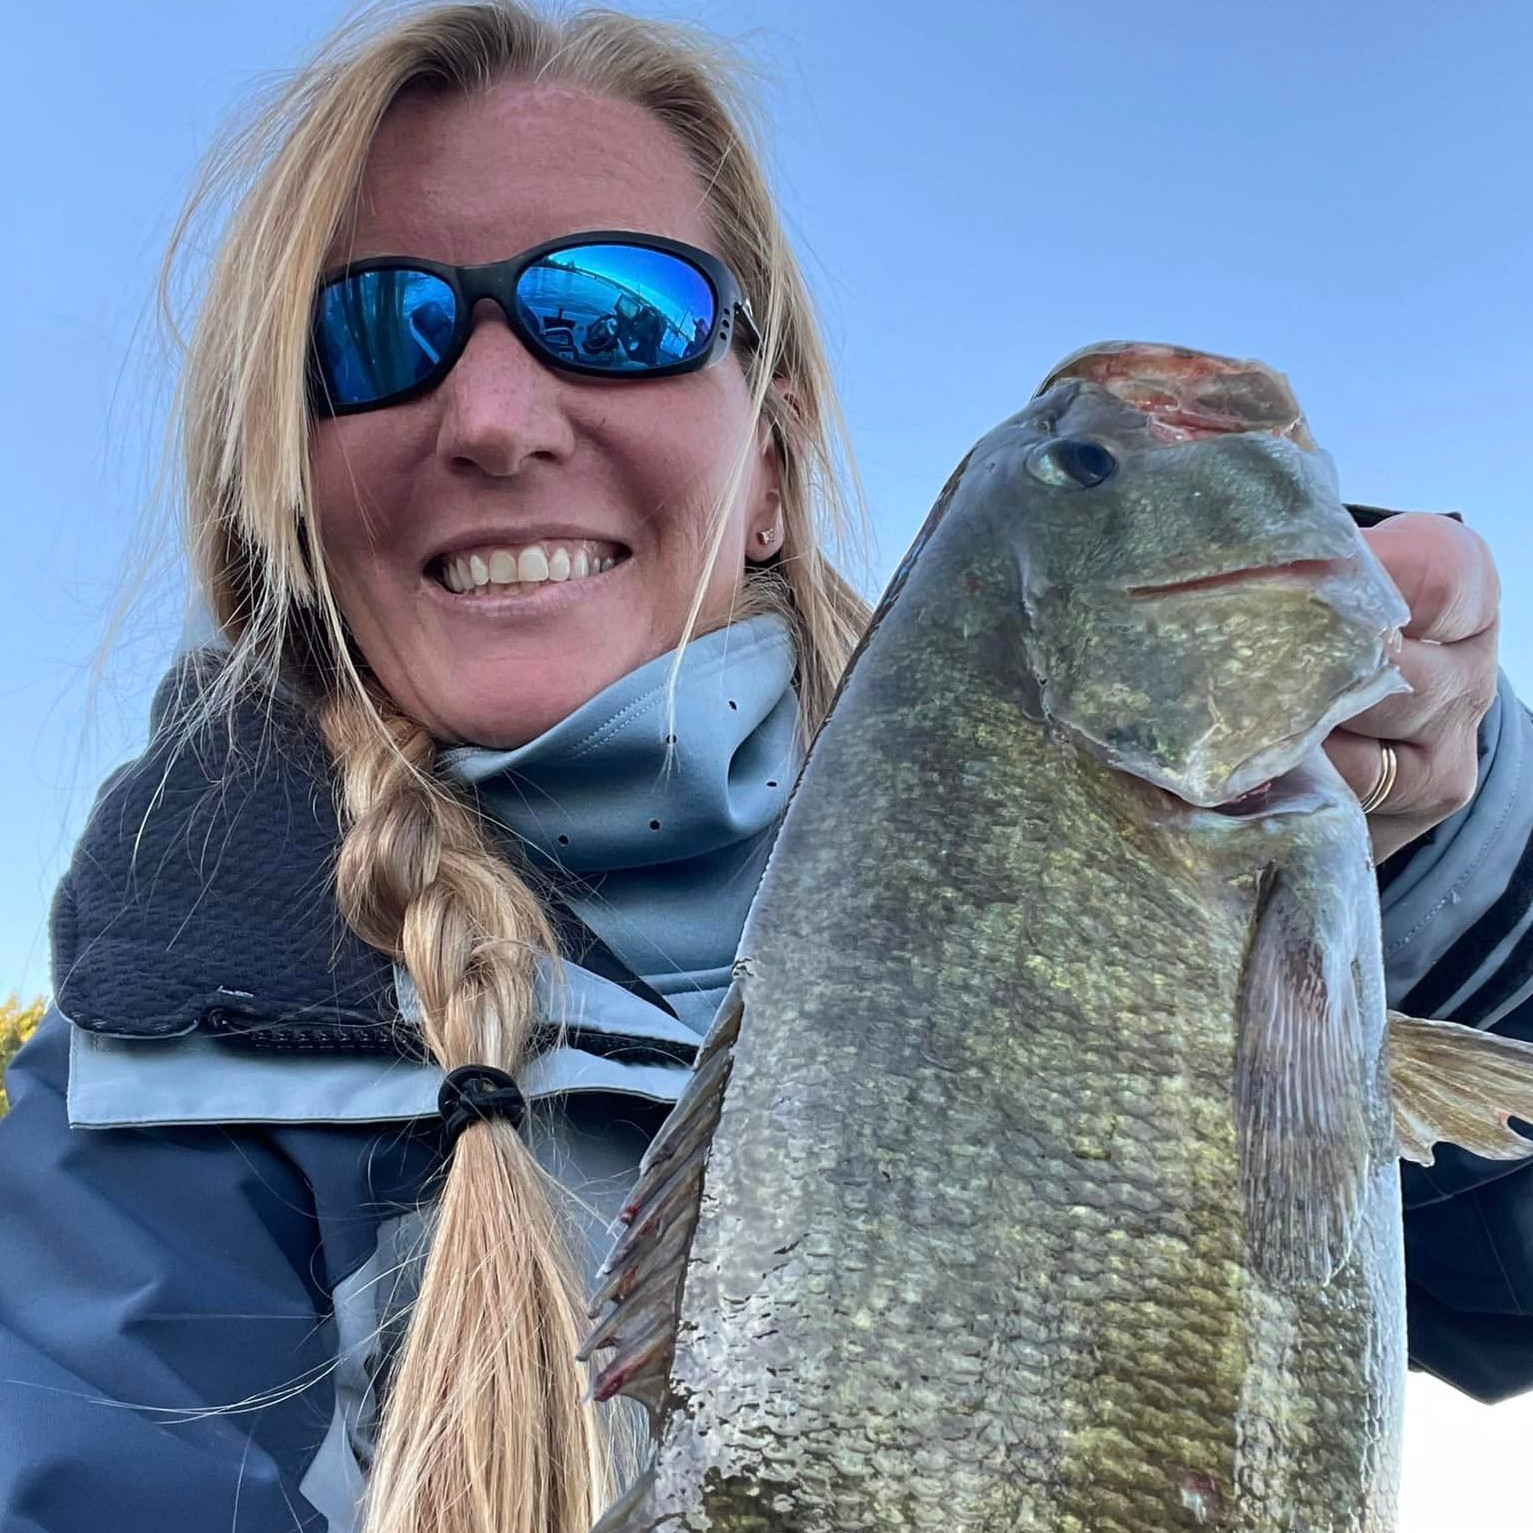 Fish Her Established in 2023 by Tricia McGraw, an Ohio female tournament angler, for Women....